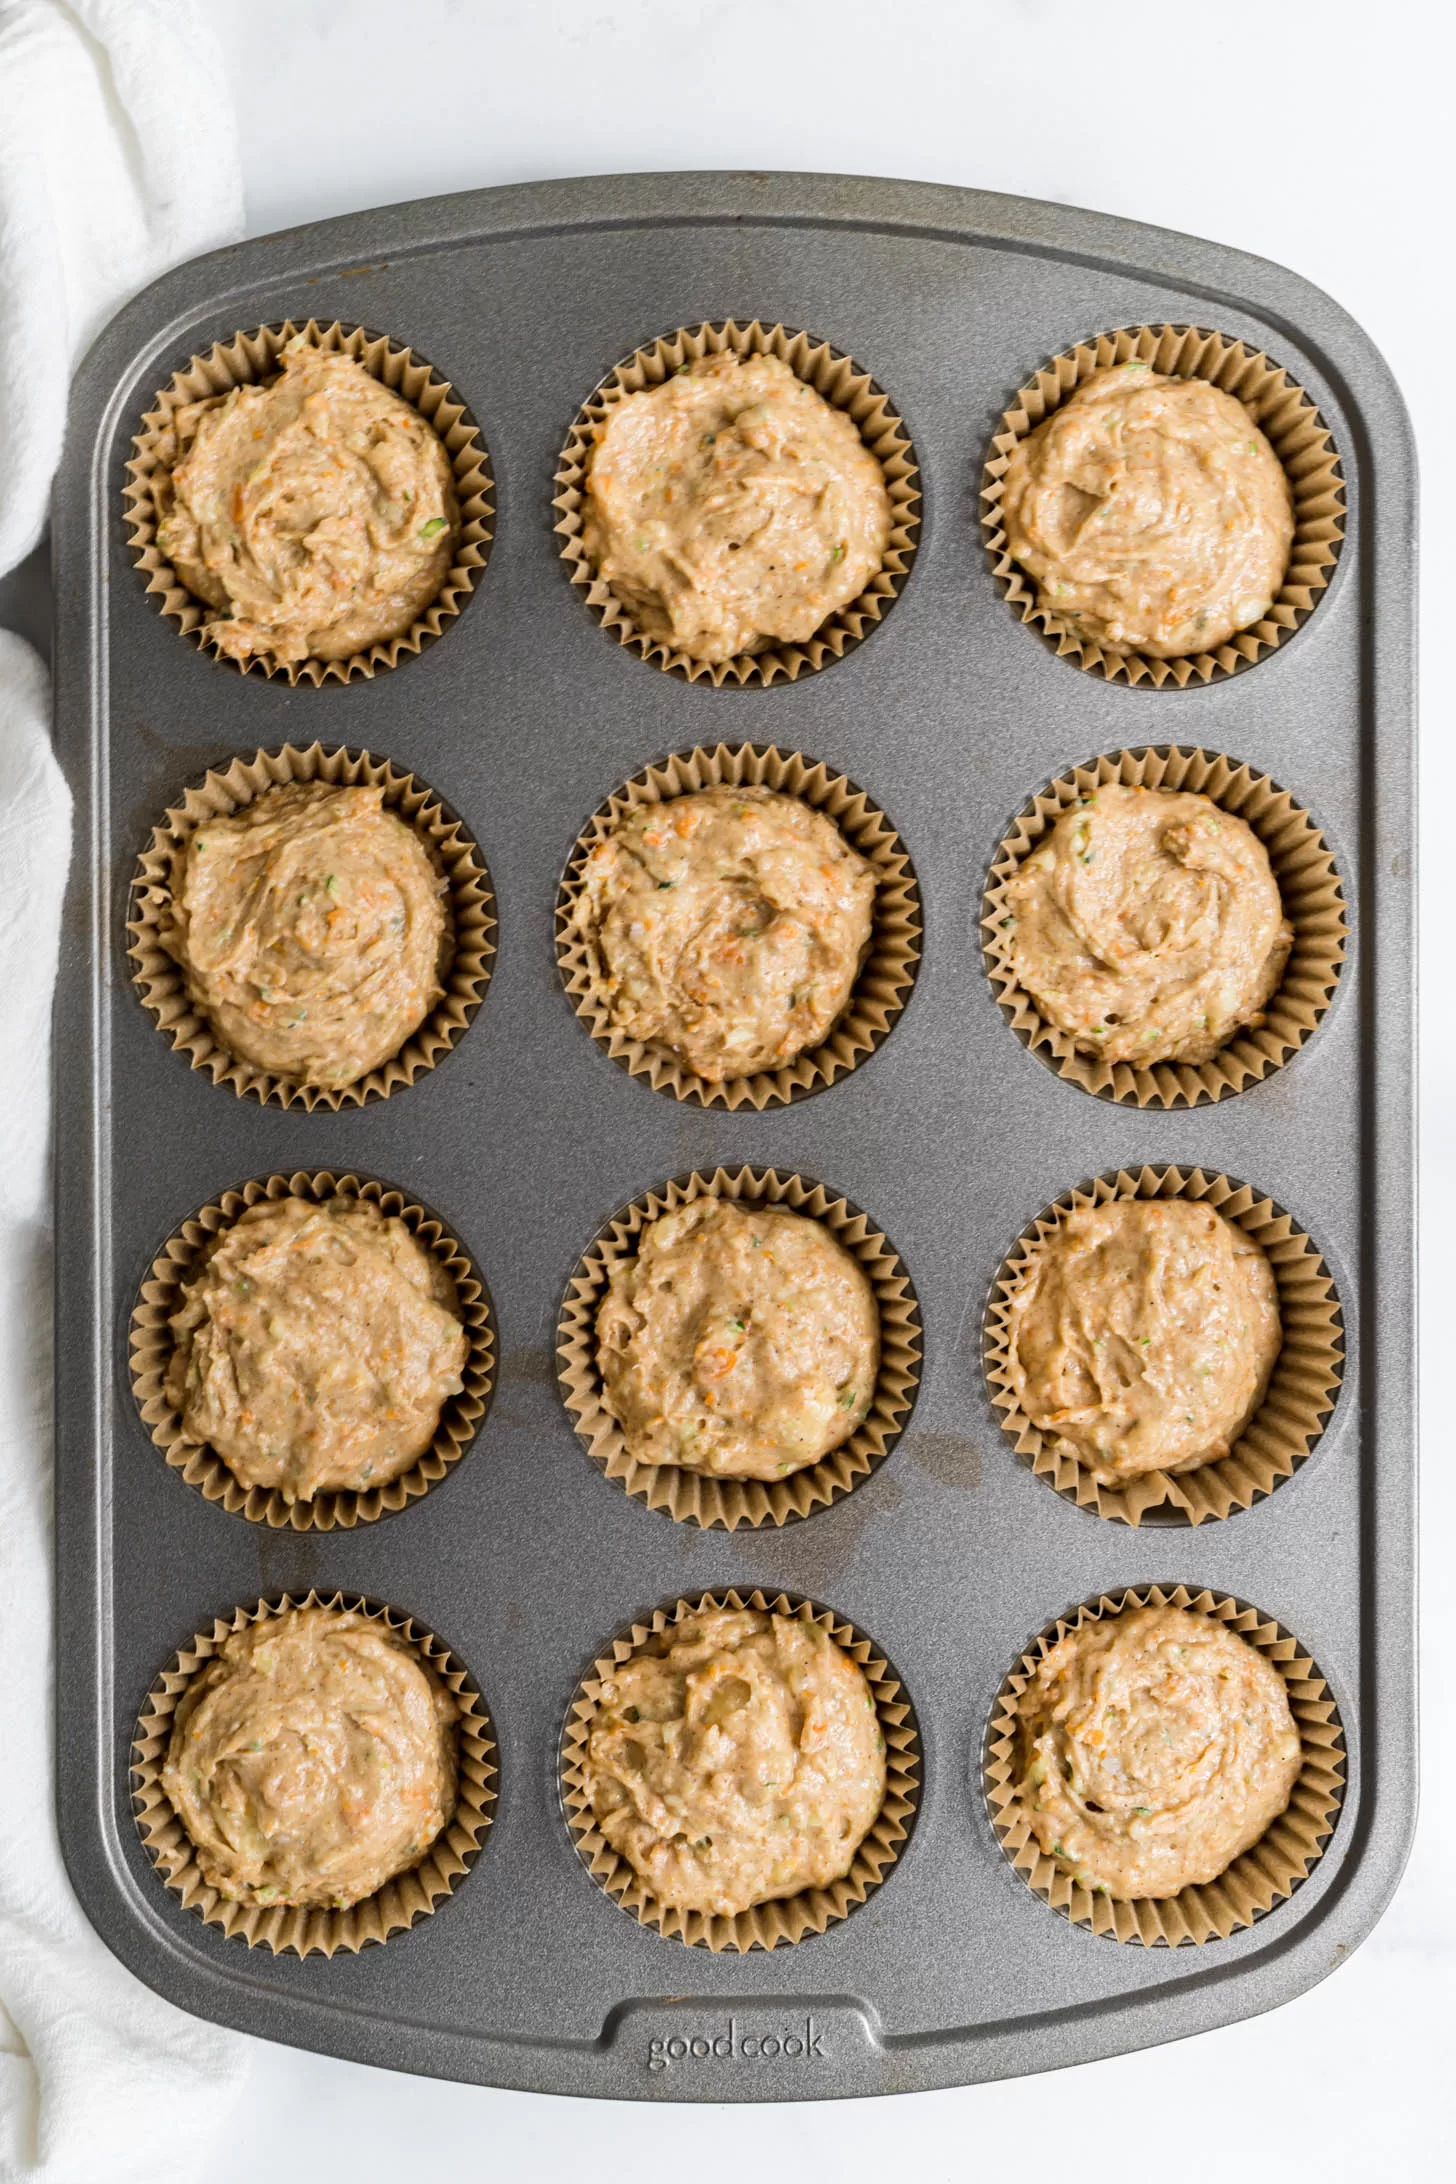 Uncooked muffins in a muffin tin.